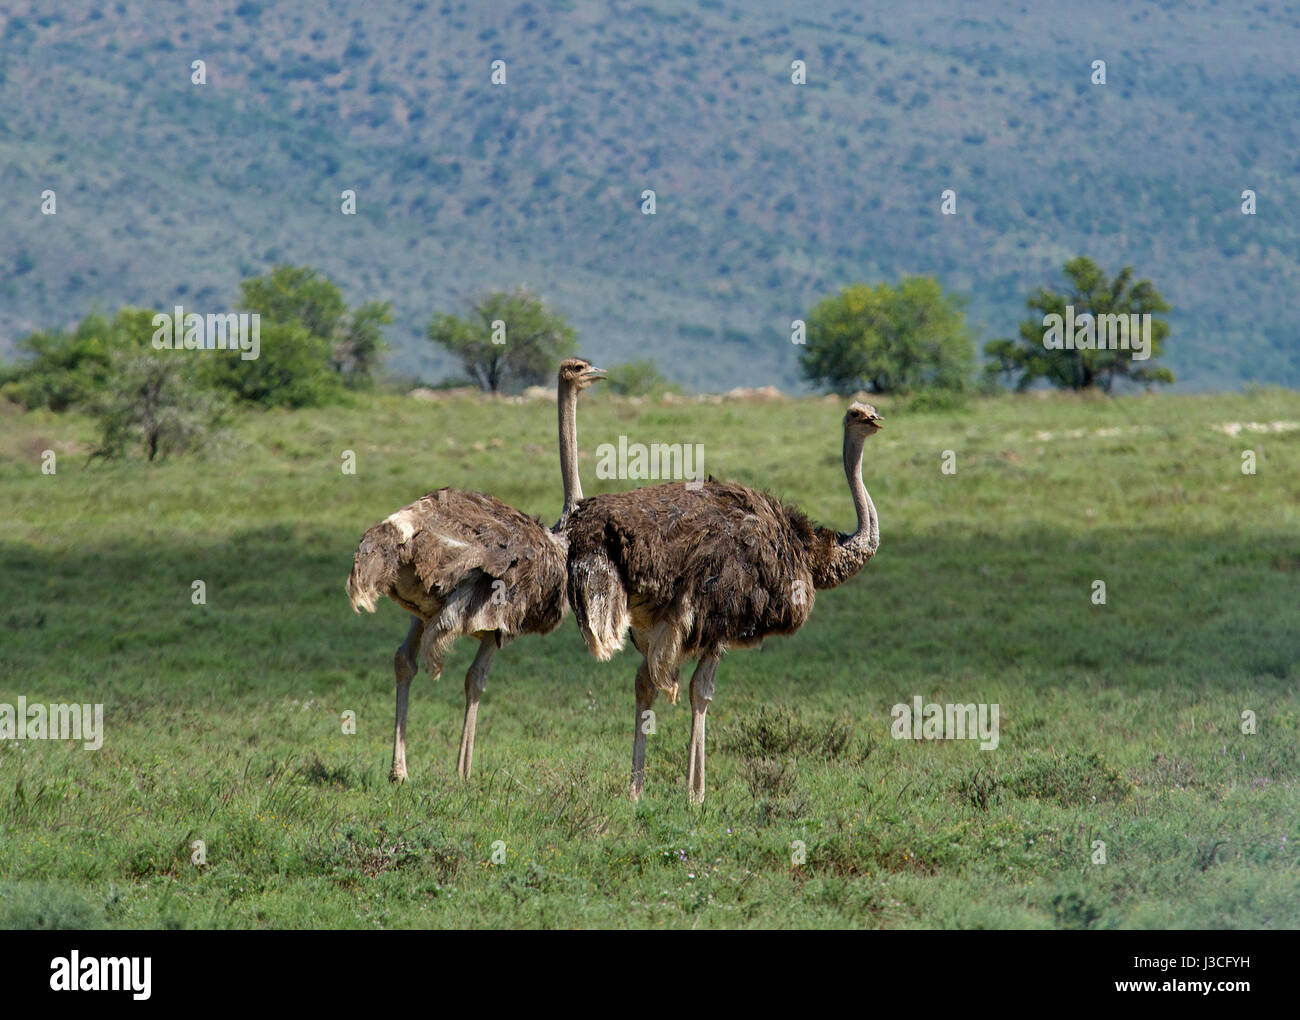 Two ostriches amdeboo Nation Park Graaff Reinet Eastern Cape South Africa Stock Photo